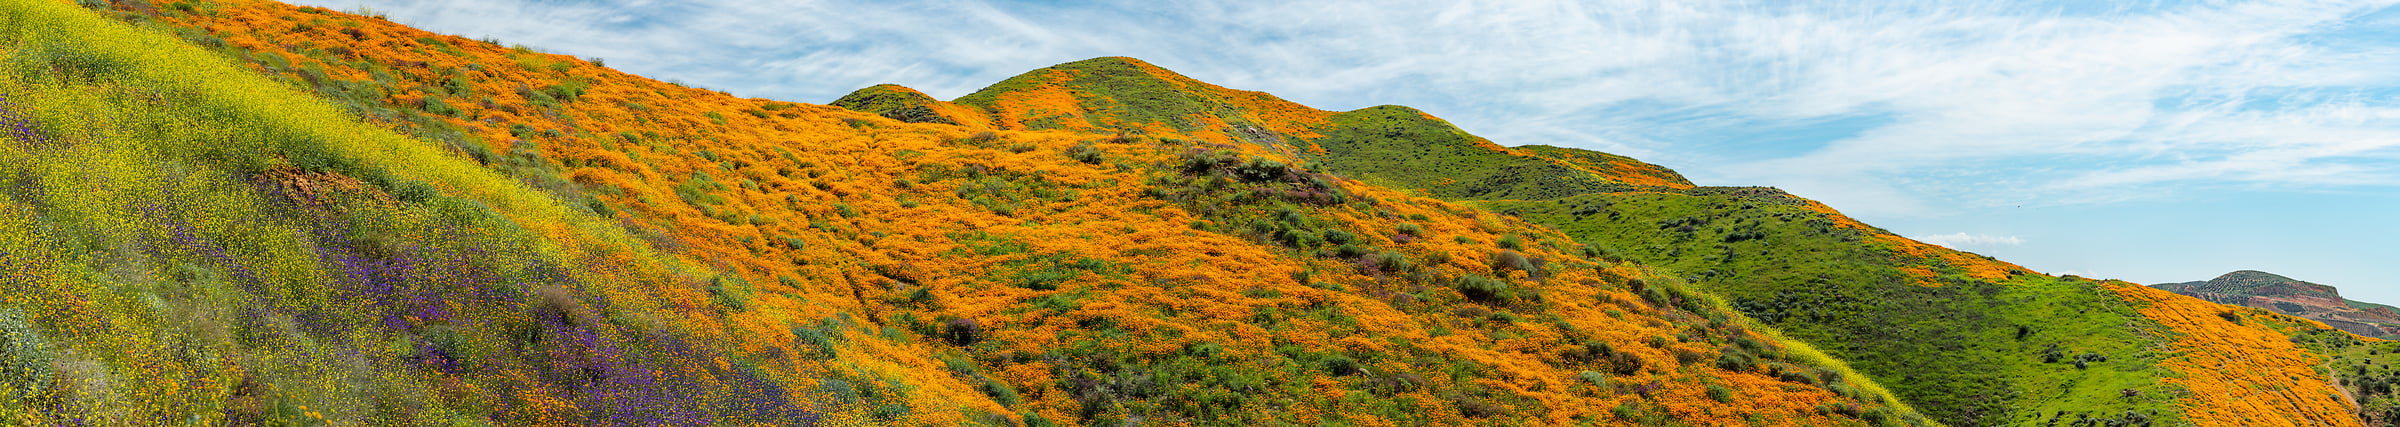 590 megapixels! A very high resolution, large-format VAST photo print of hills with flowers on them; landscape photograph created by Jim Tarpo in Walker Canyon, California.